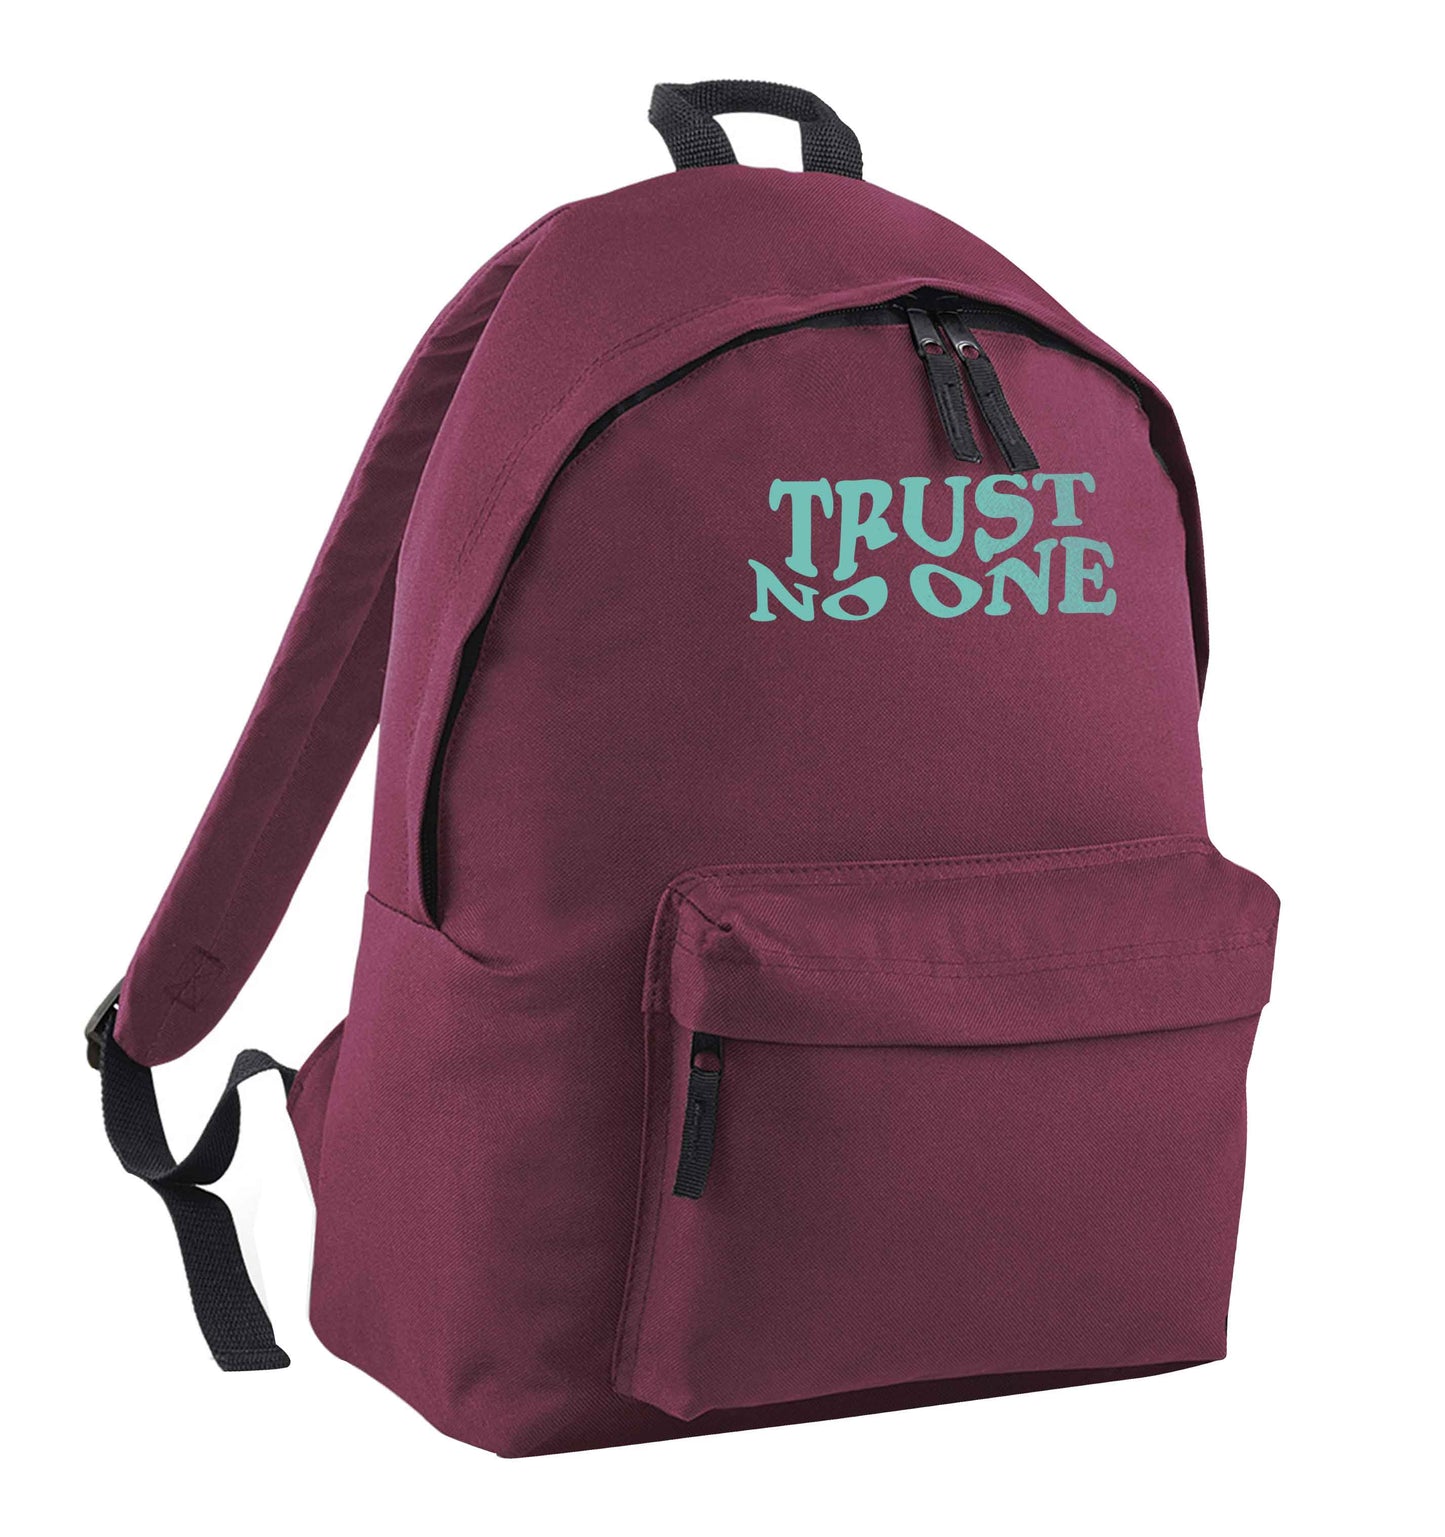 Trust no one maroon adults backpack